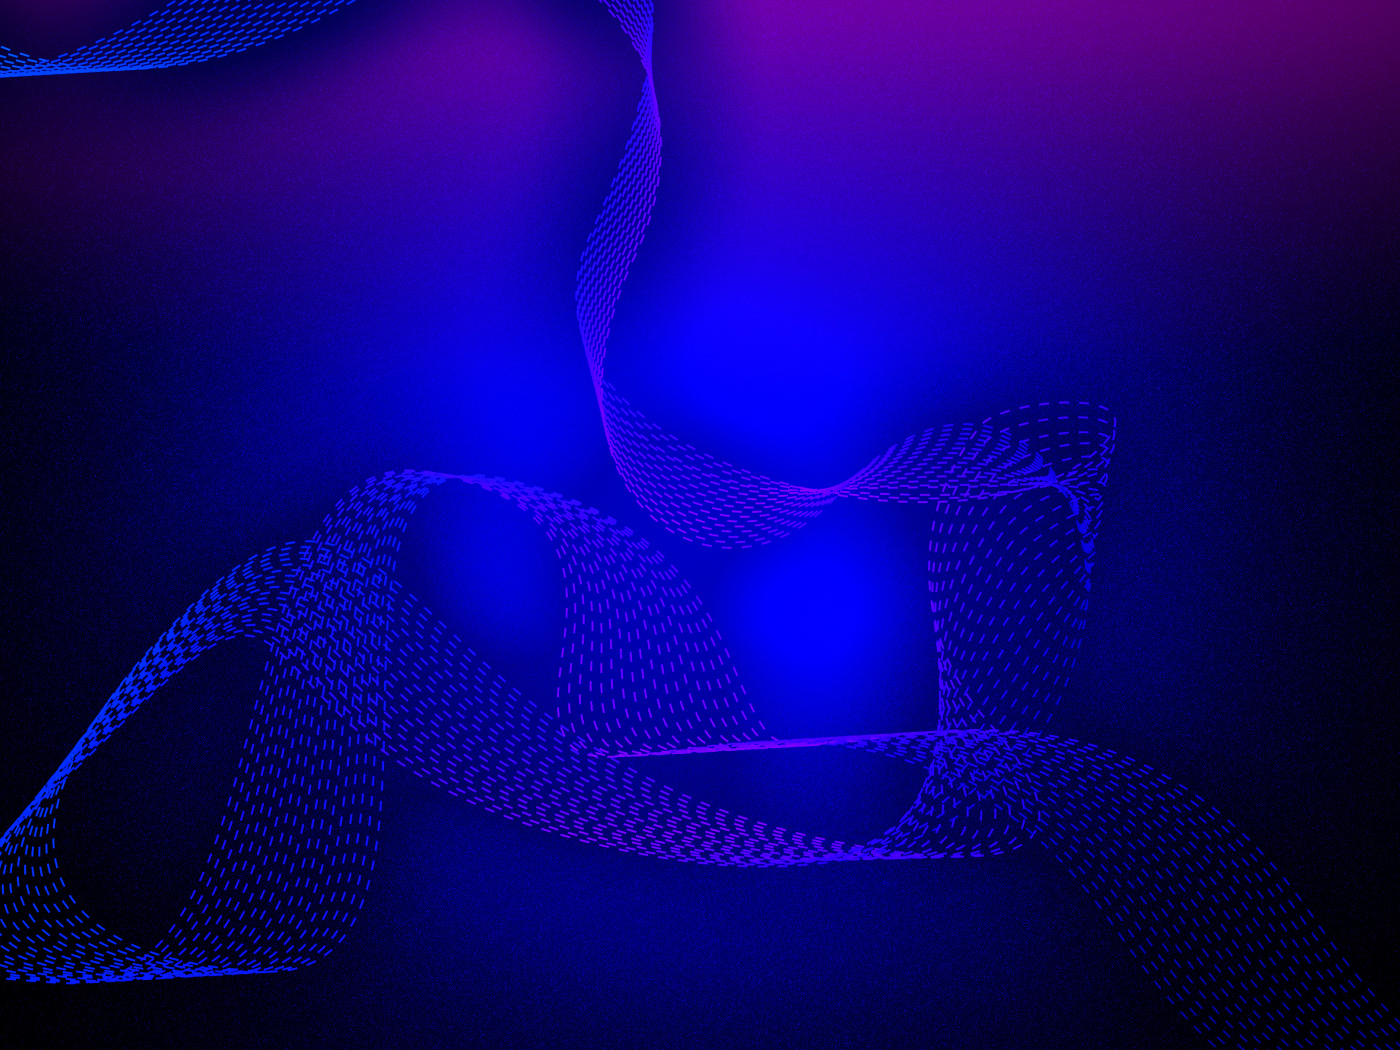 Abstract ribbon on purple background